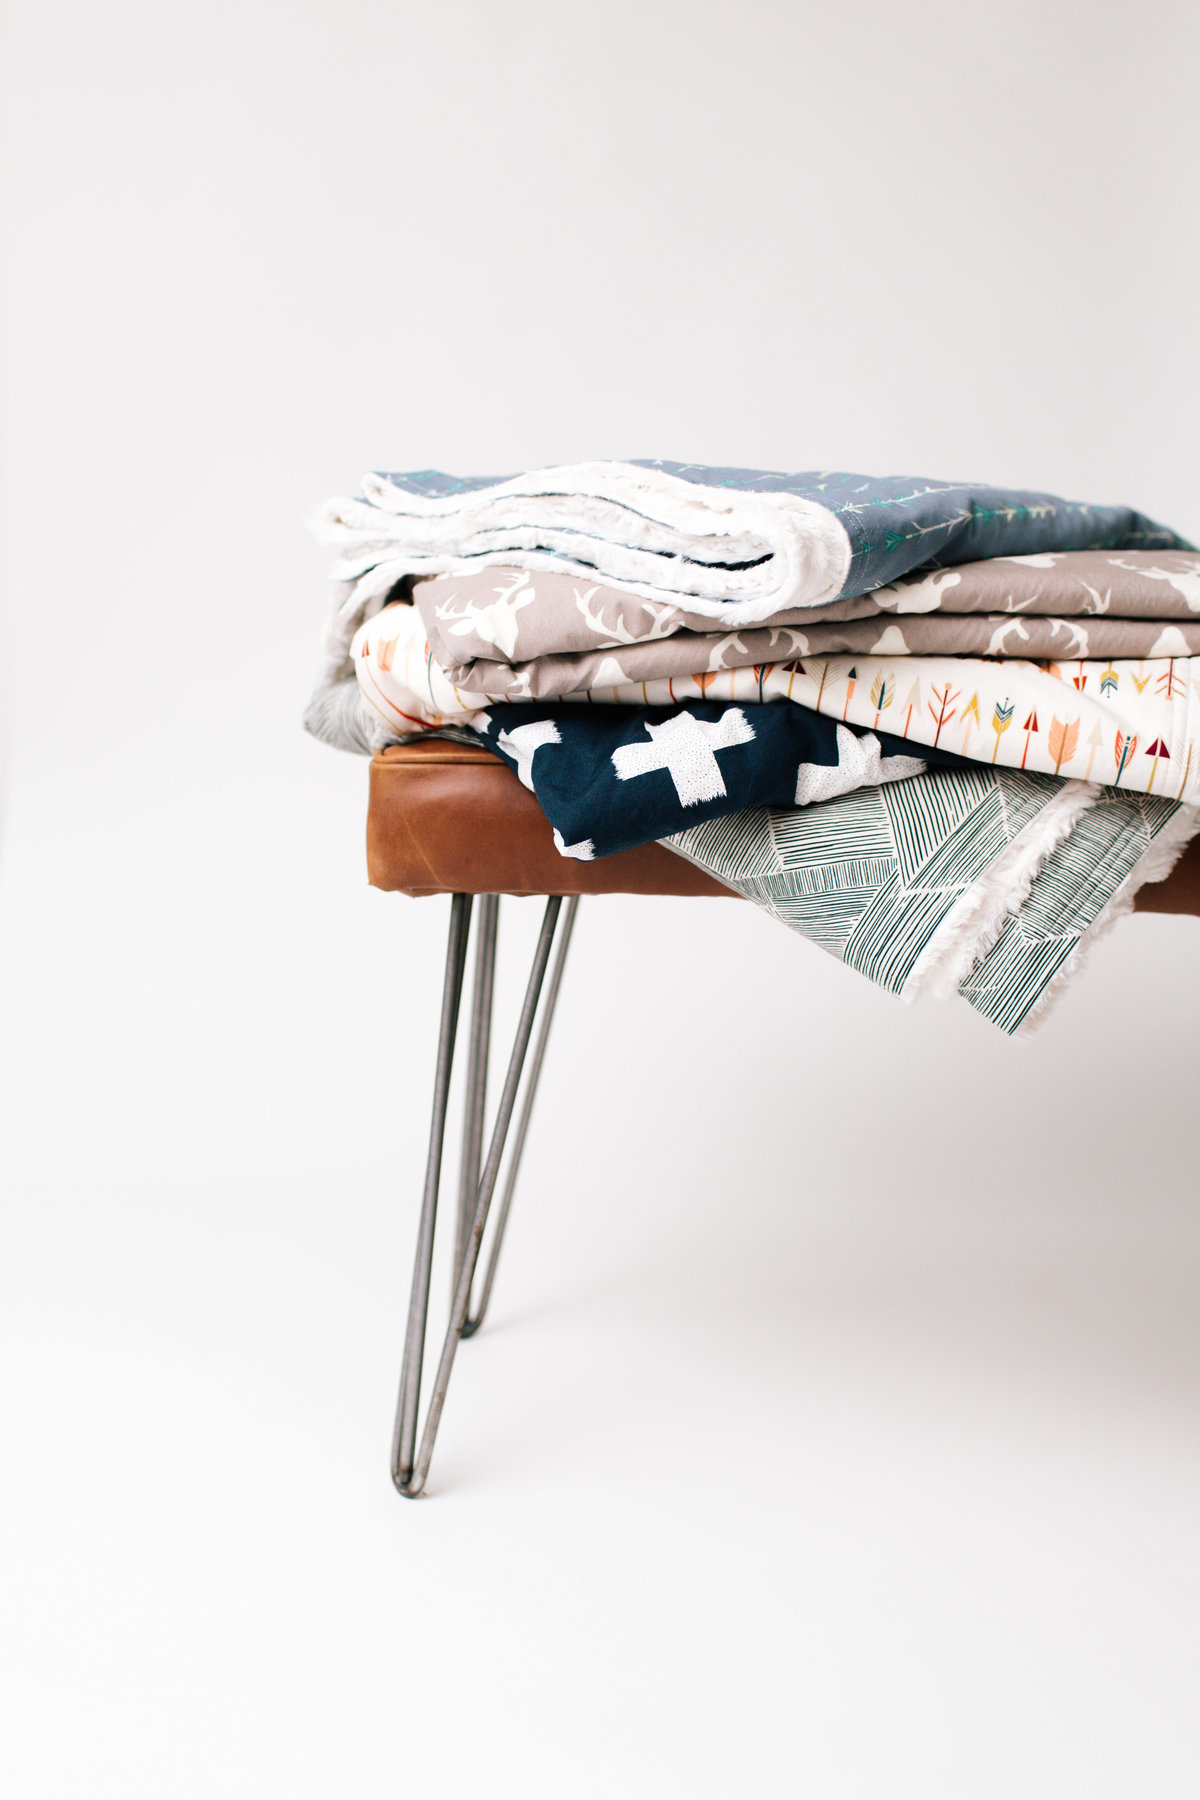 blankets stacked on leather bench with white background